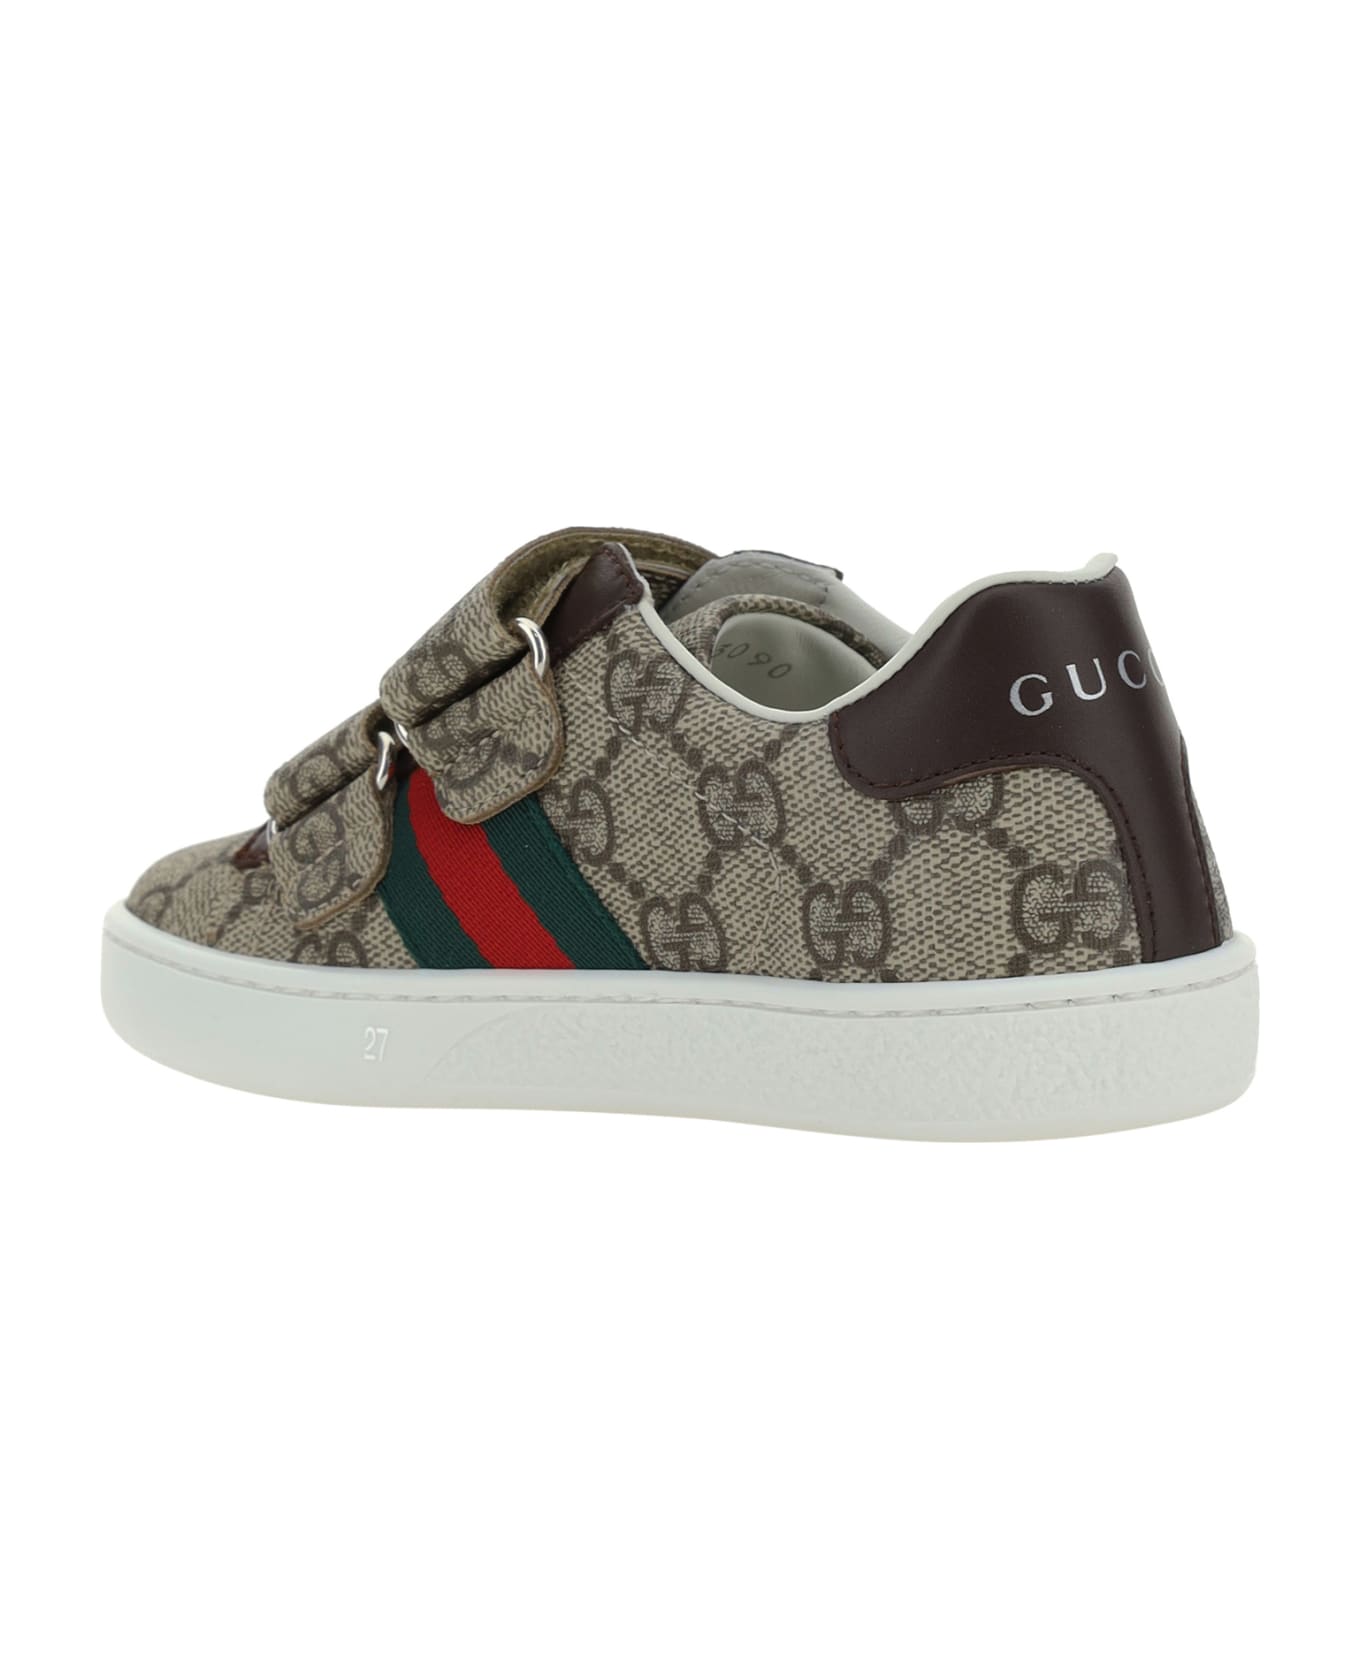 Gucci Sneakers For Boy シューズ